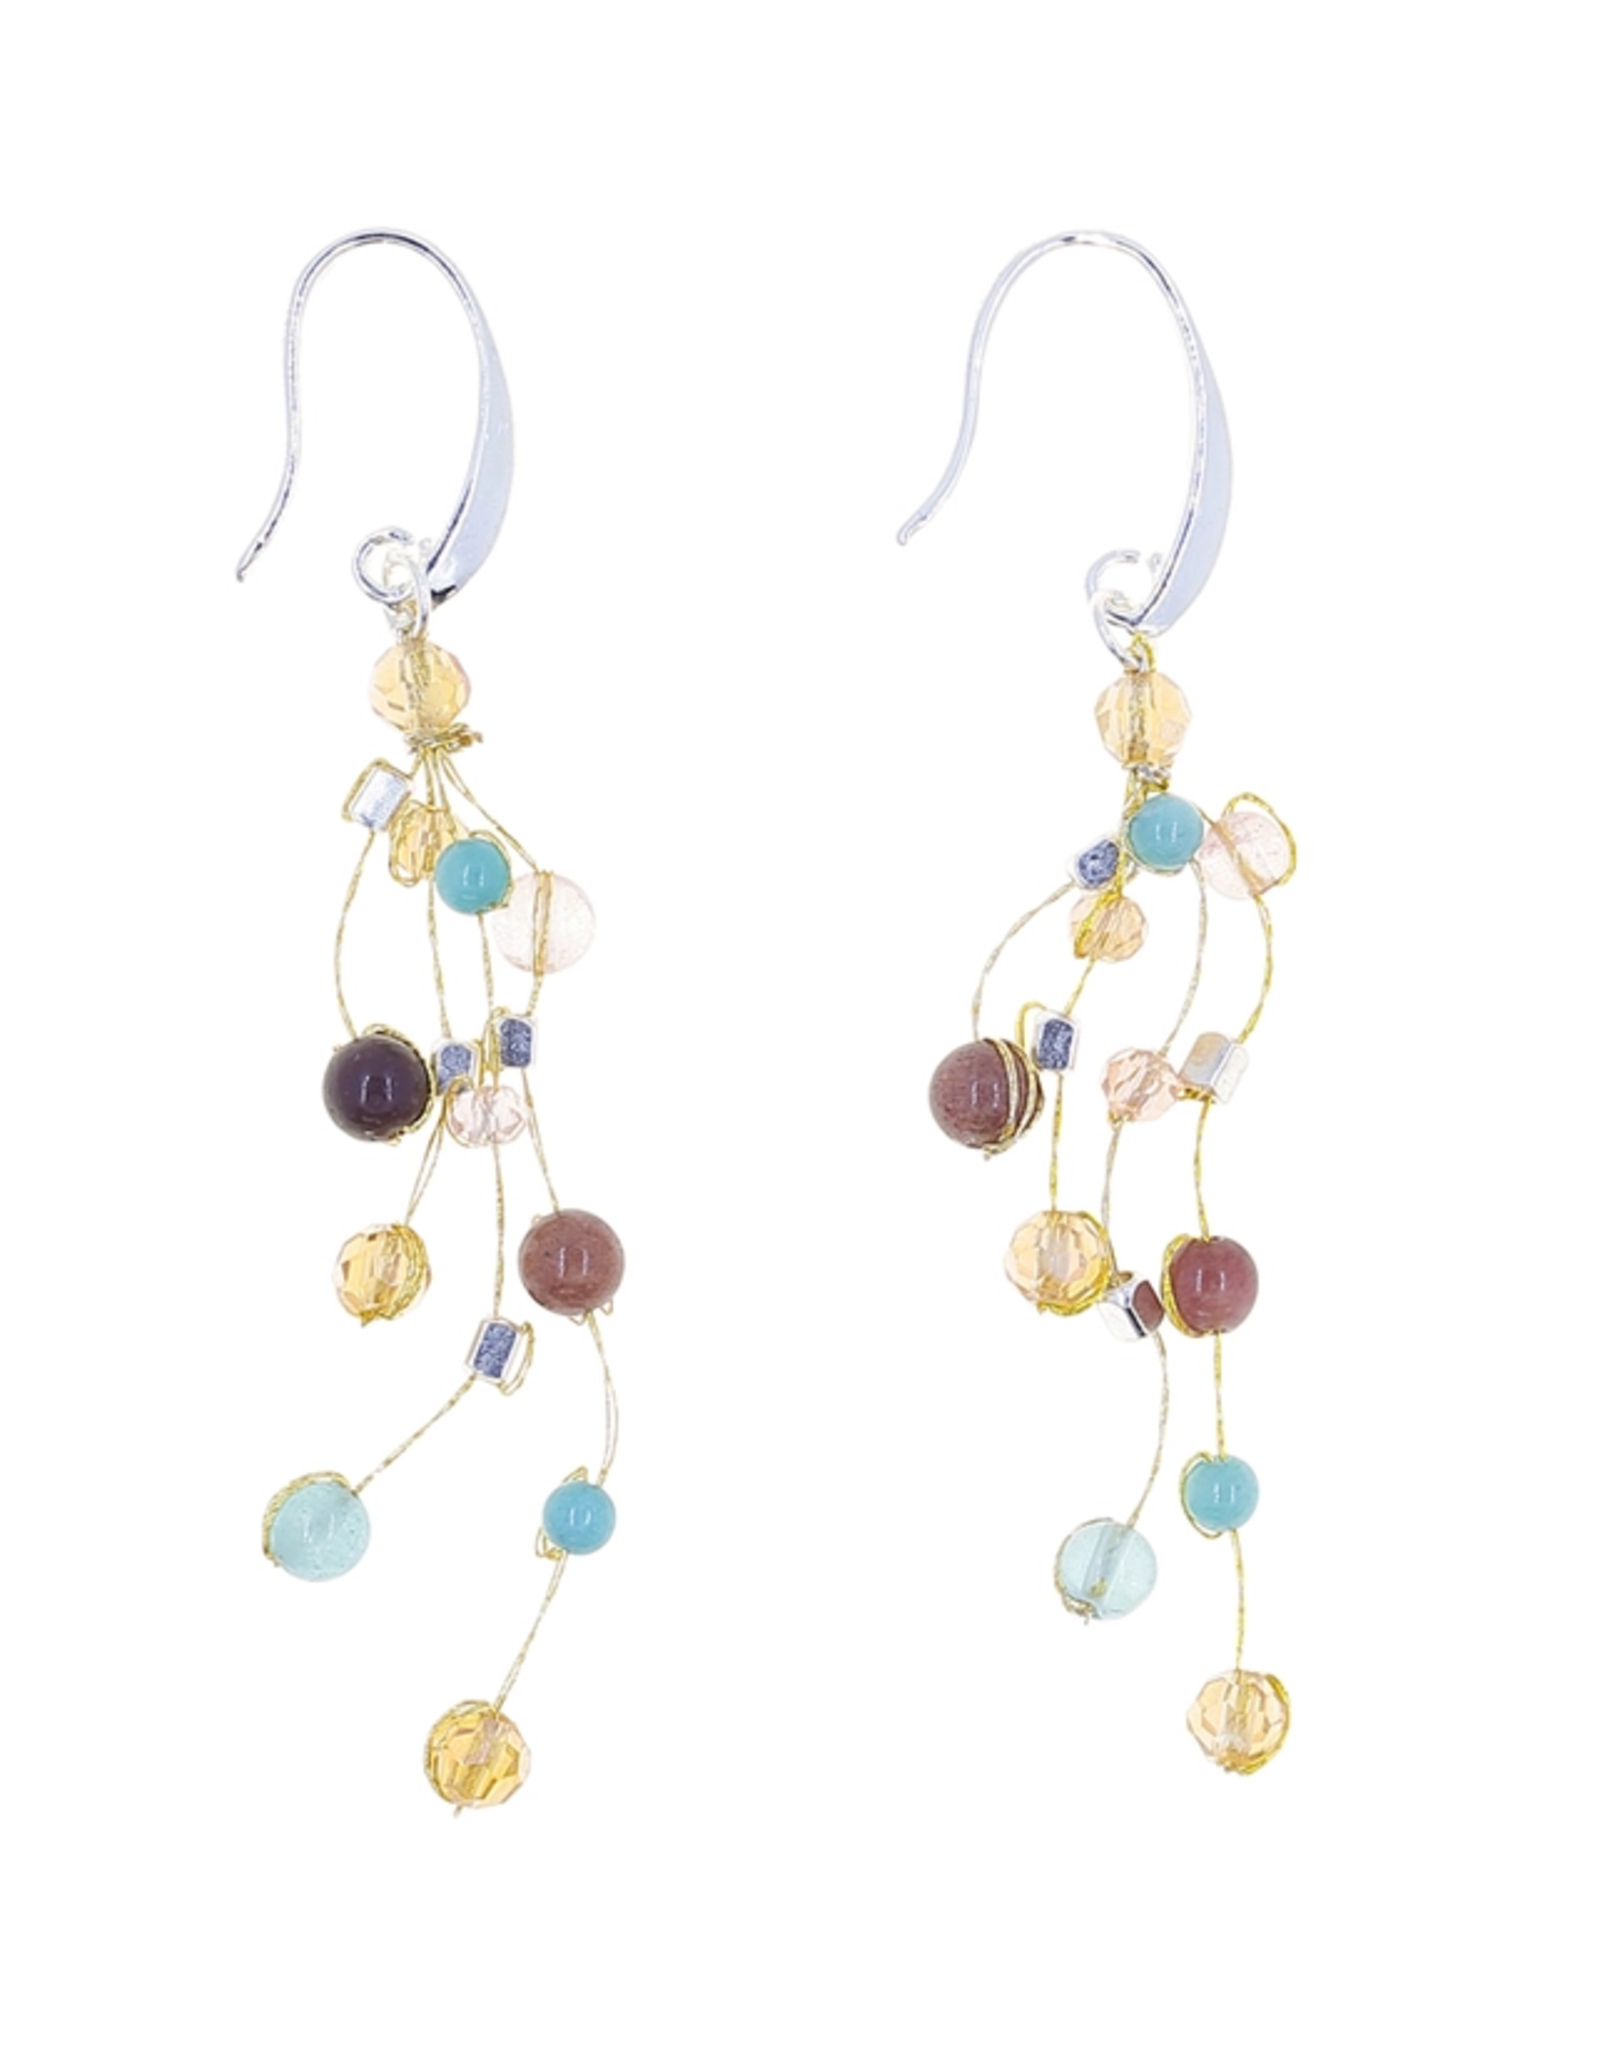 Trade roots Reena Multistrand Silk and Bead Earrings